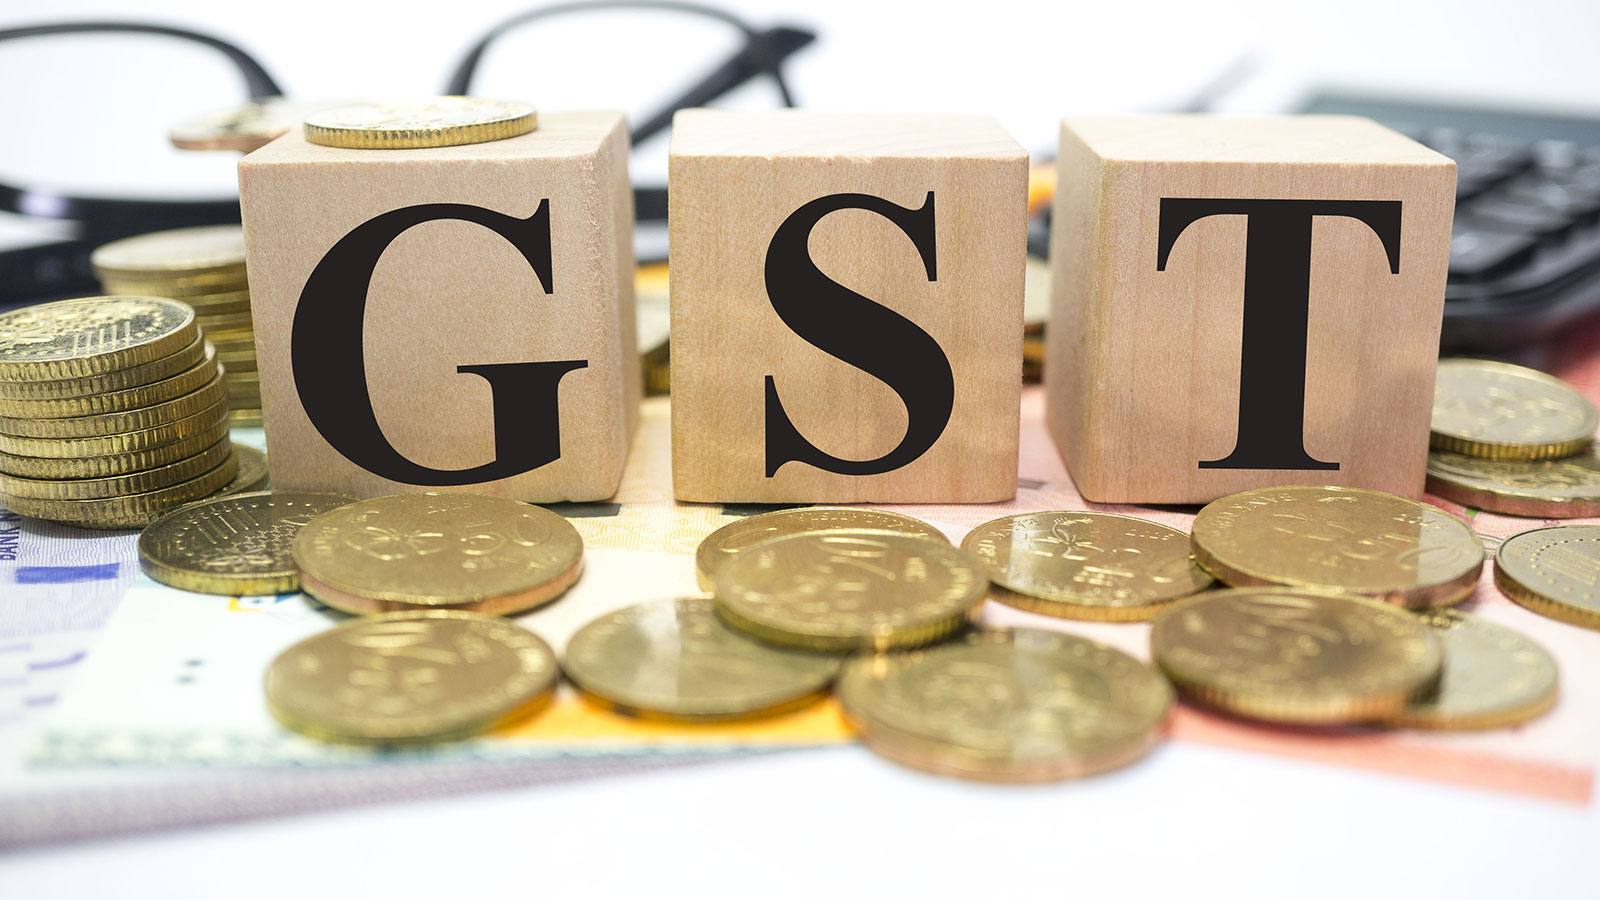 can-income-tax-be-abolished-by-increasing-gst-rates-ipleaders